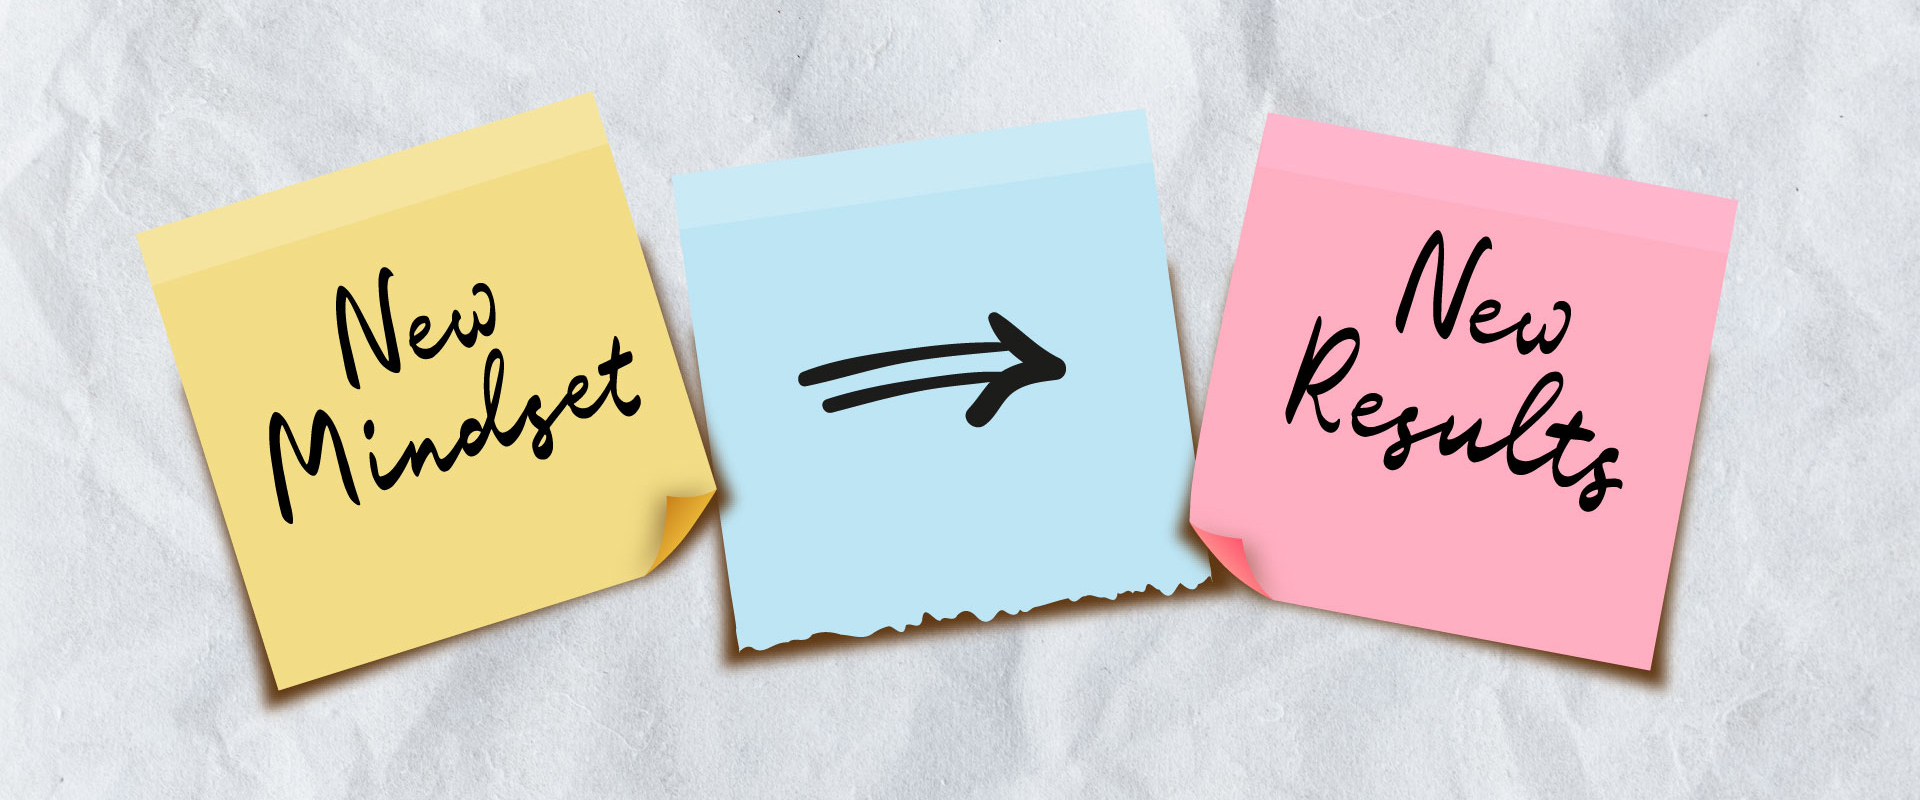 three post-it notes, the one on the left says "New Mindset", the middle has an arrow that points to the right, the right one says "New Results"